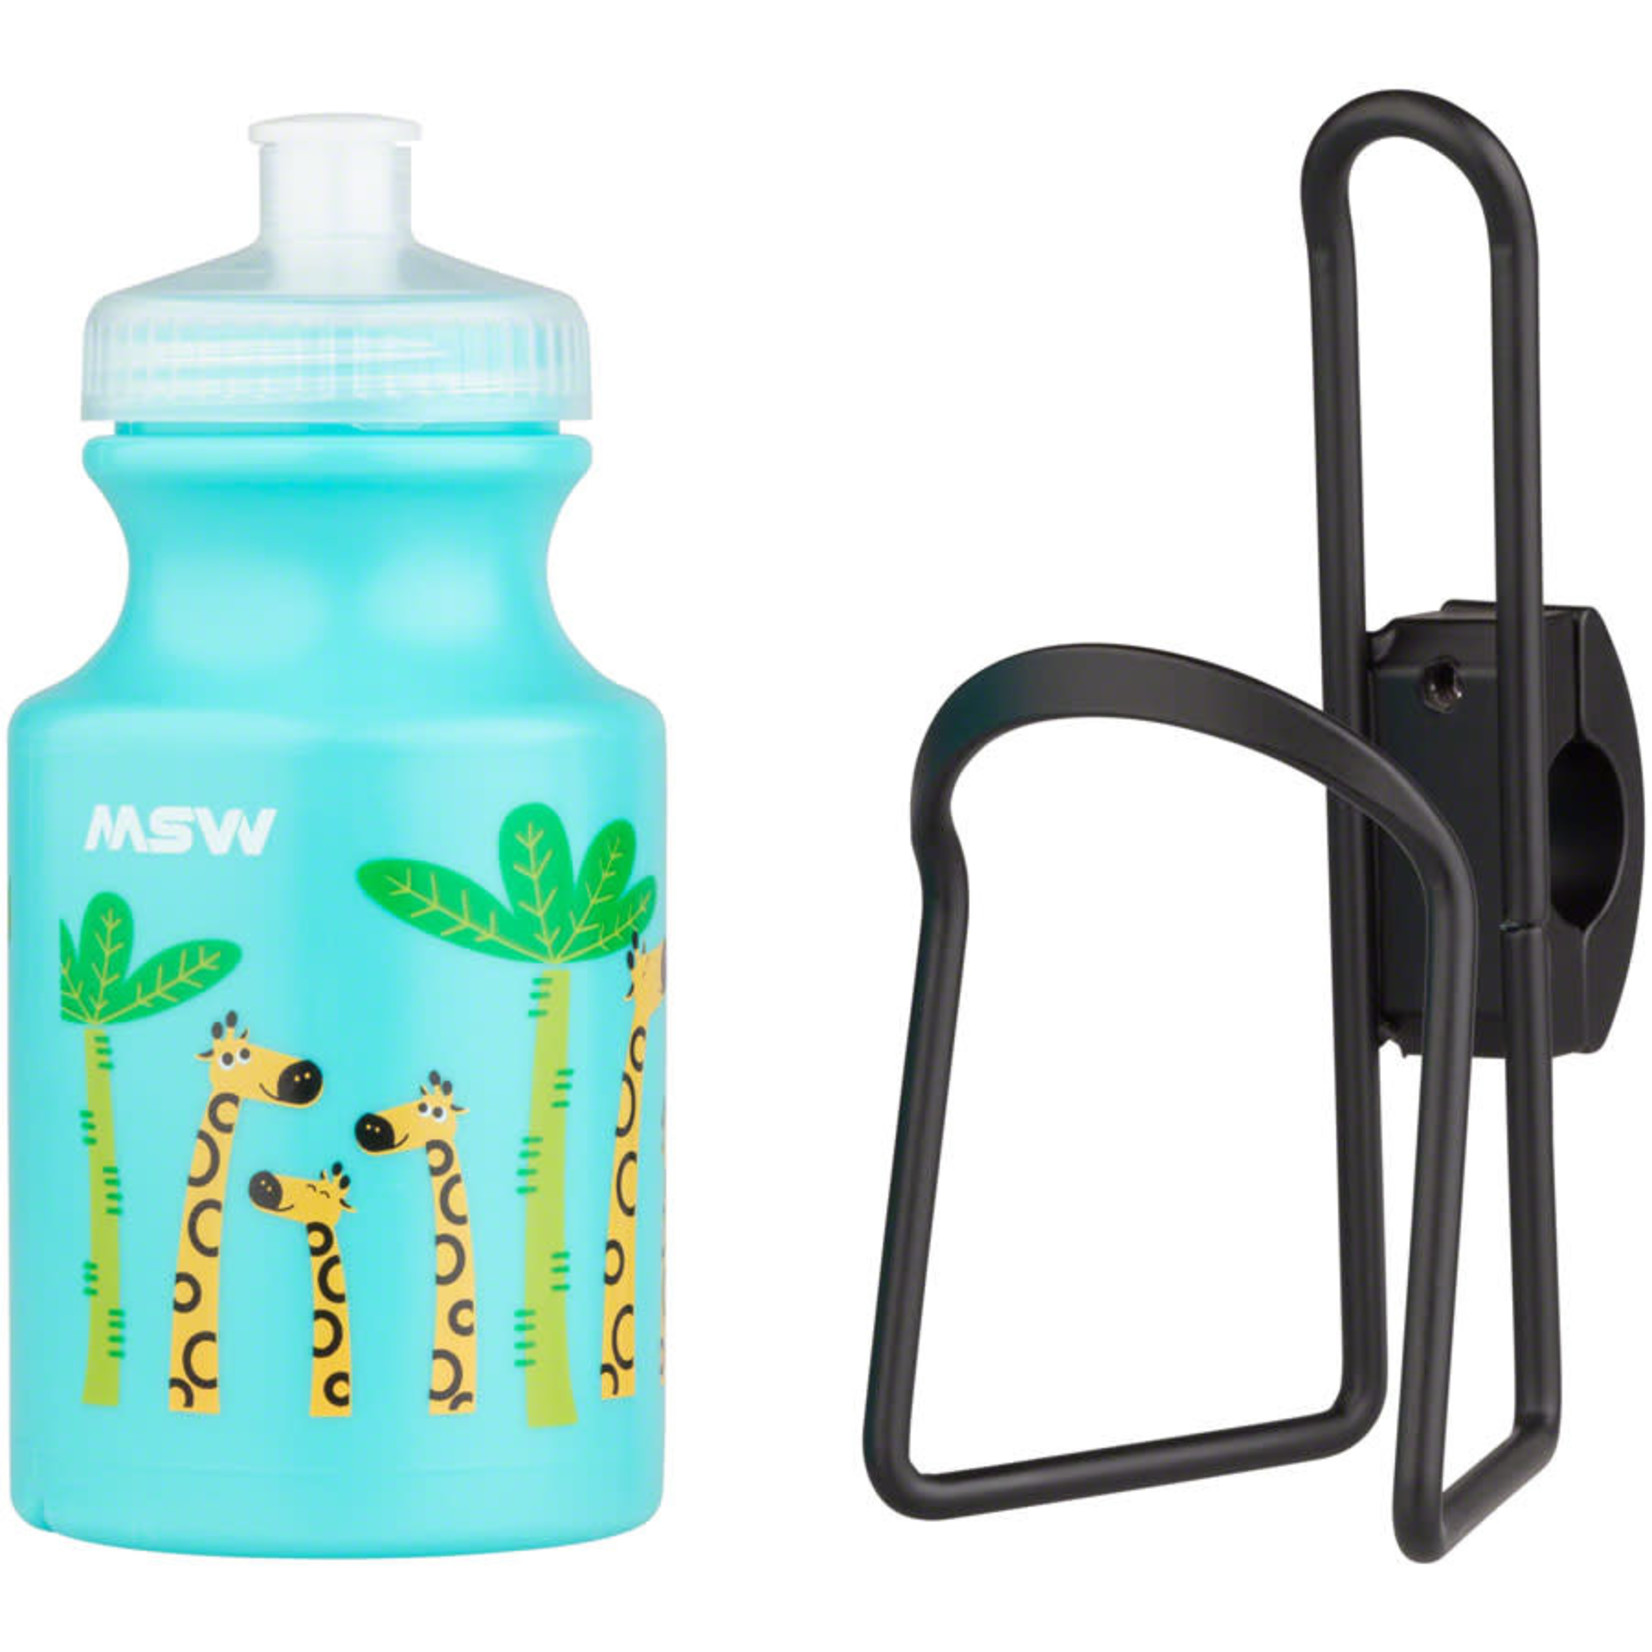 MSW MSW Kids Water Bottle and Cage Kit - Giraffe w/ Black Cage